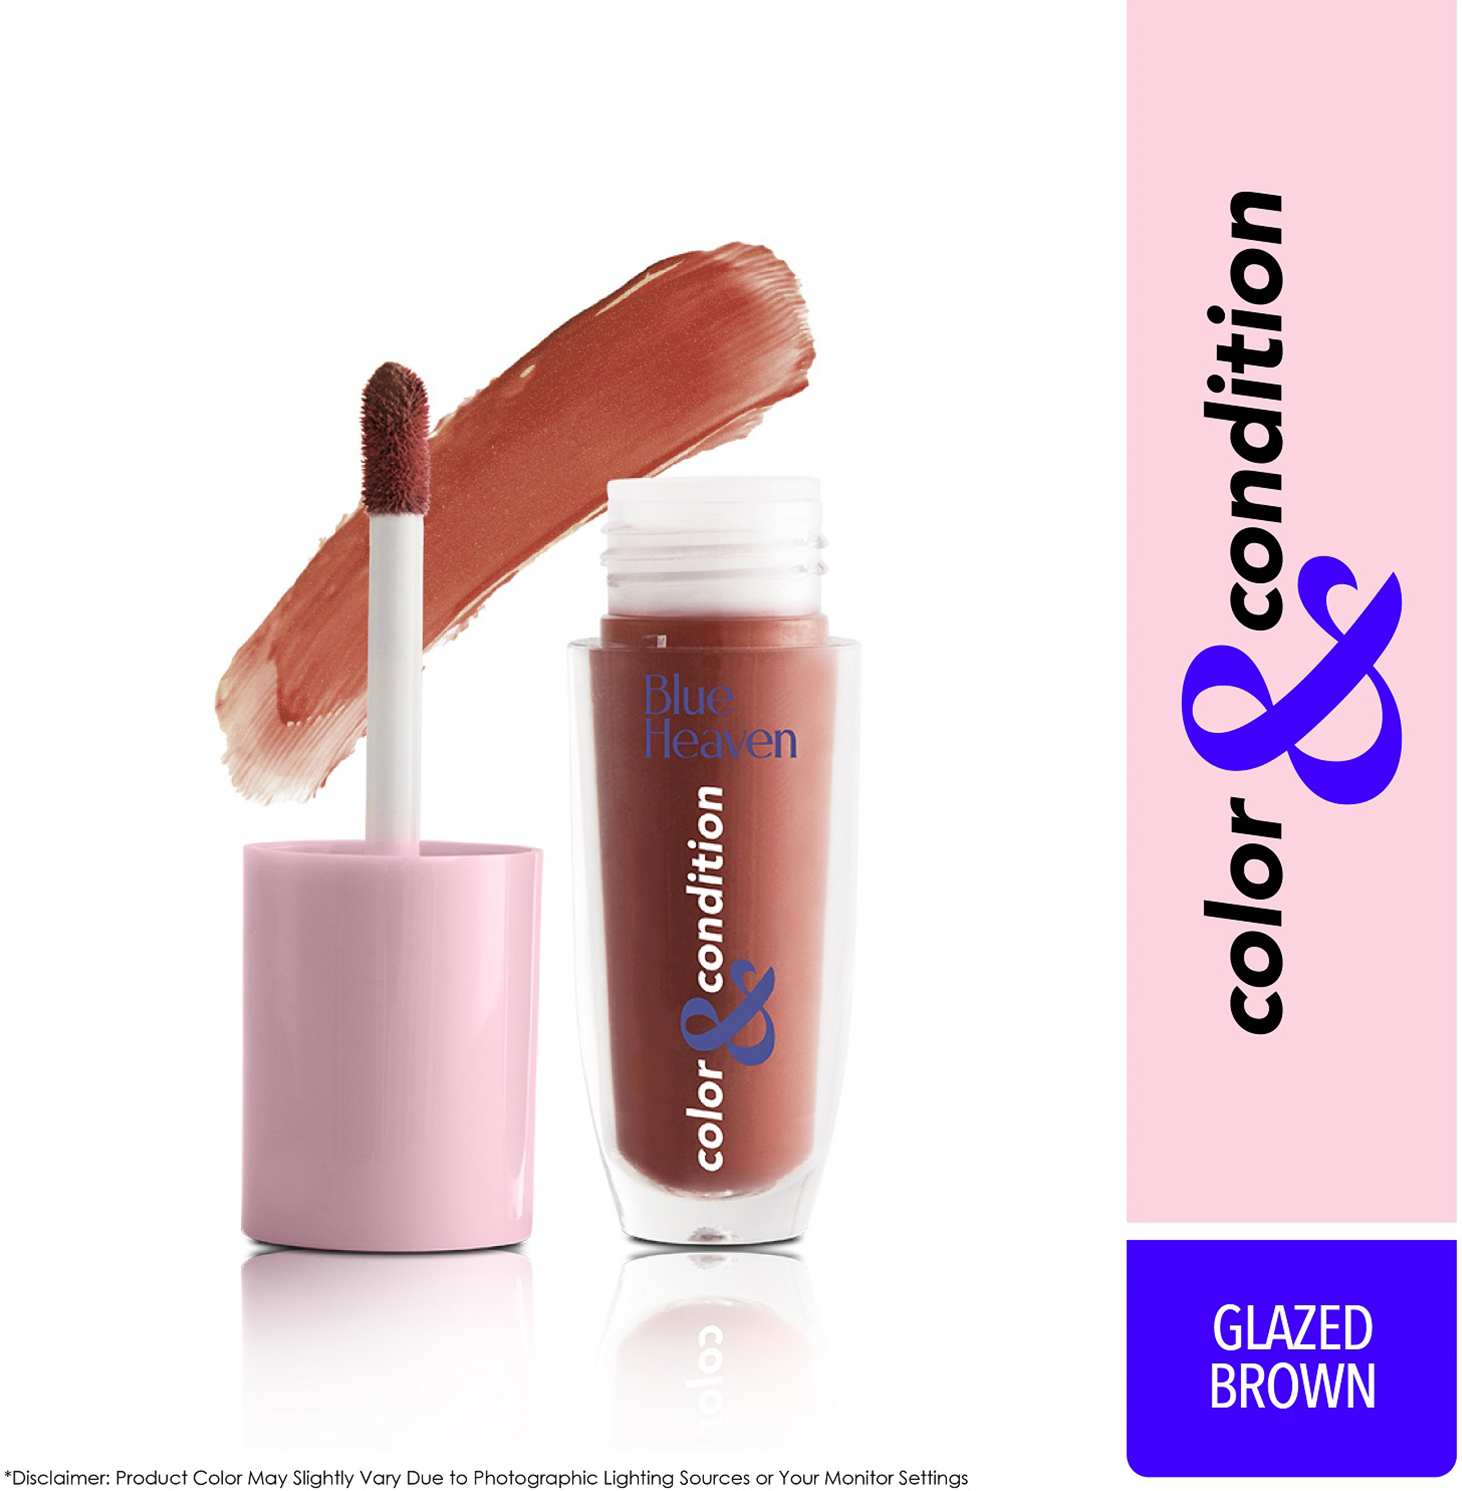 Blue Heaven Color & Condition tinted lip oil for women, Glazed Brown